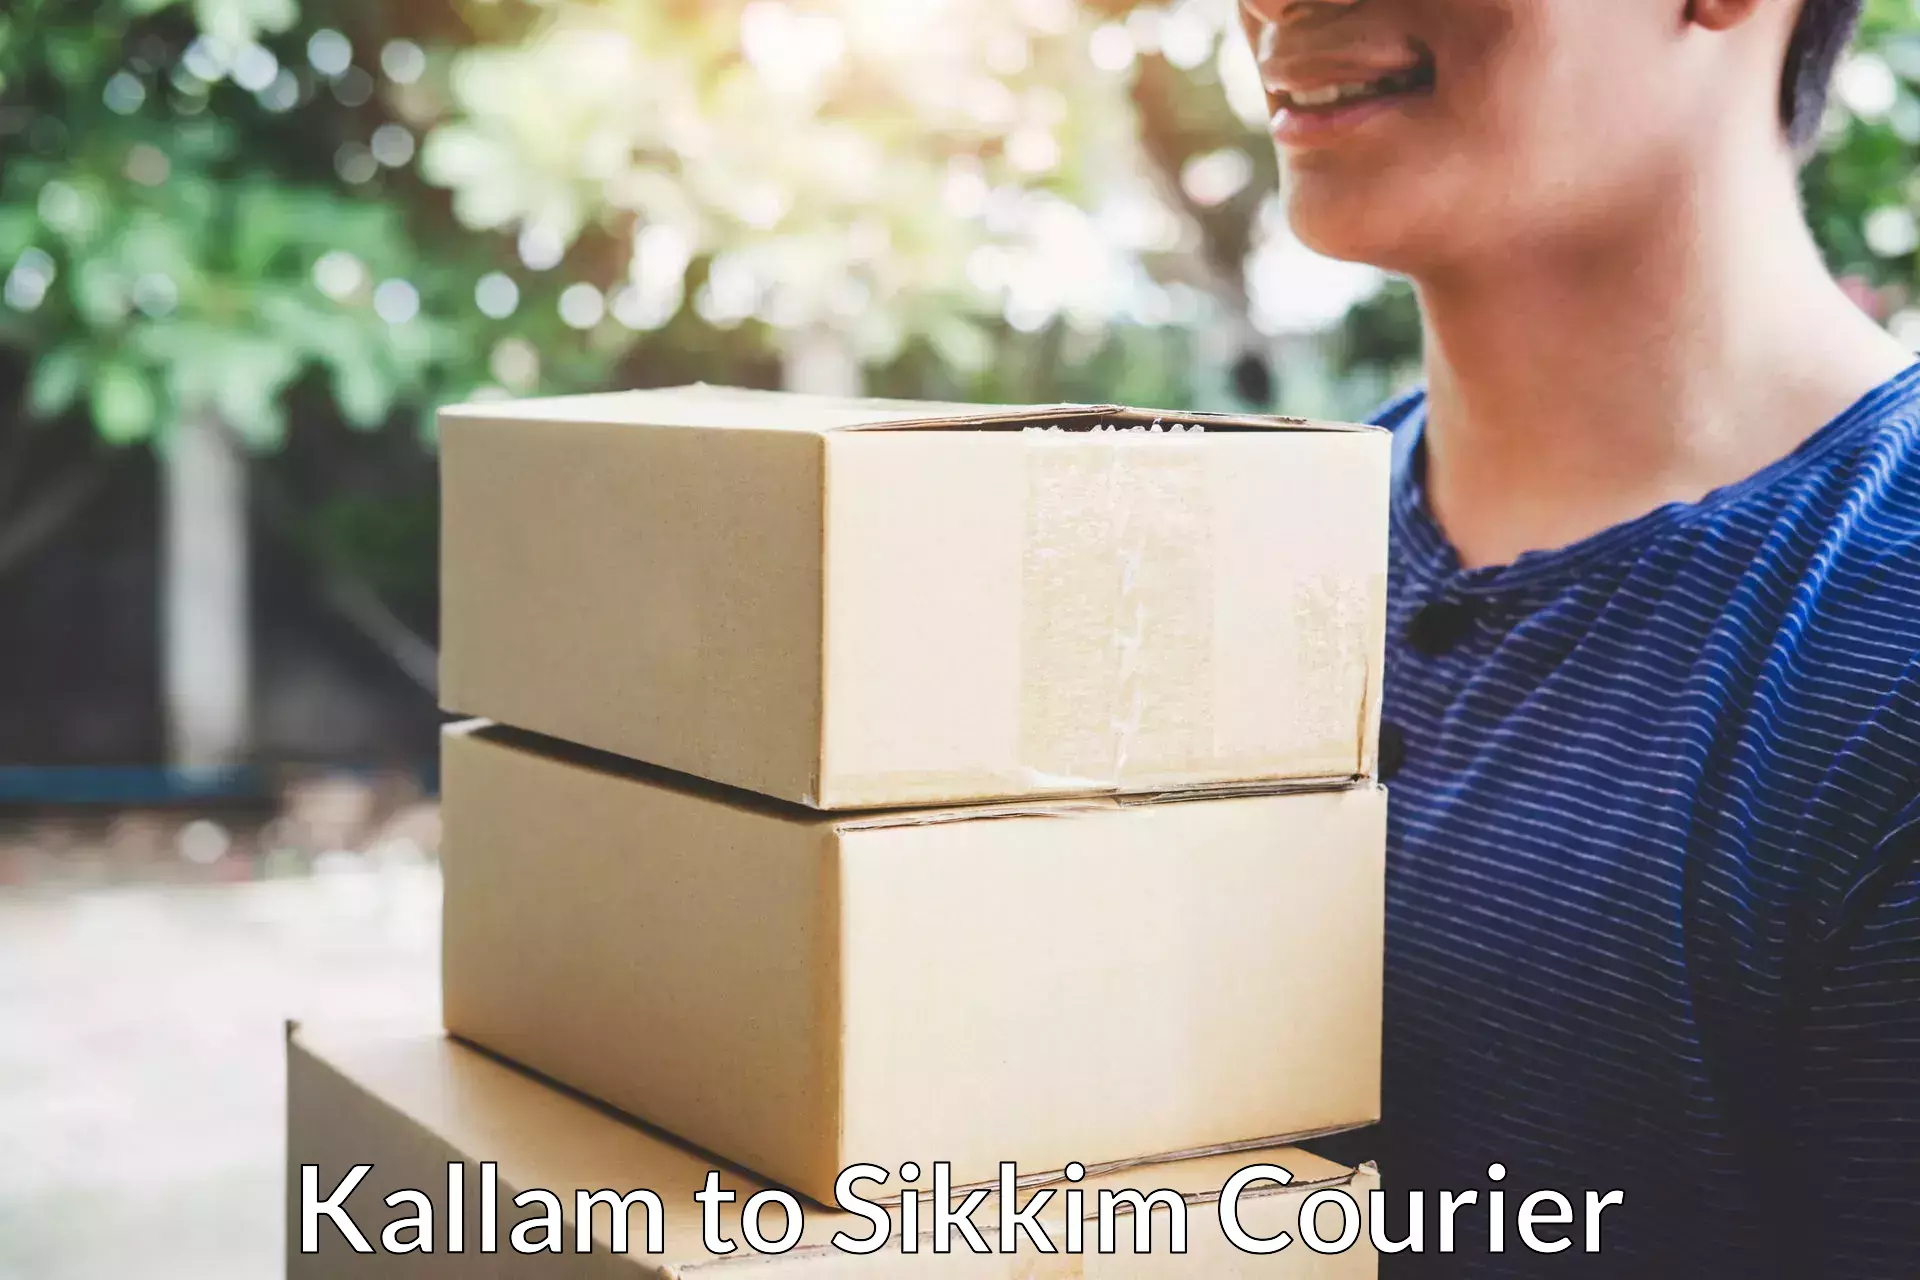 Quality relocation services Kallam to Pelling